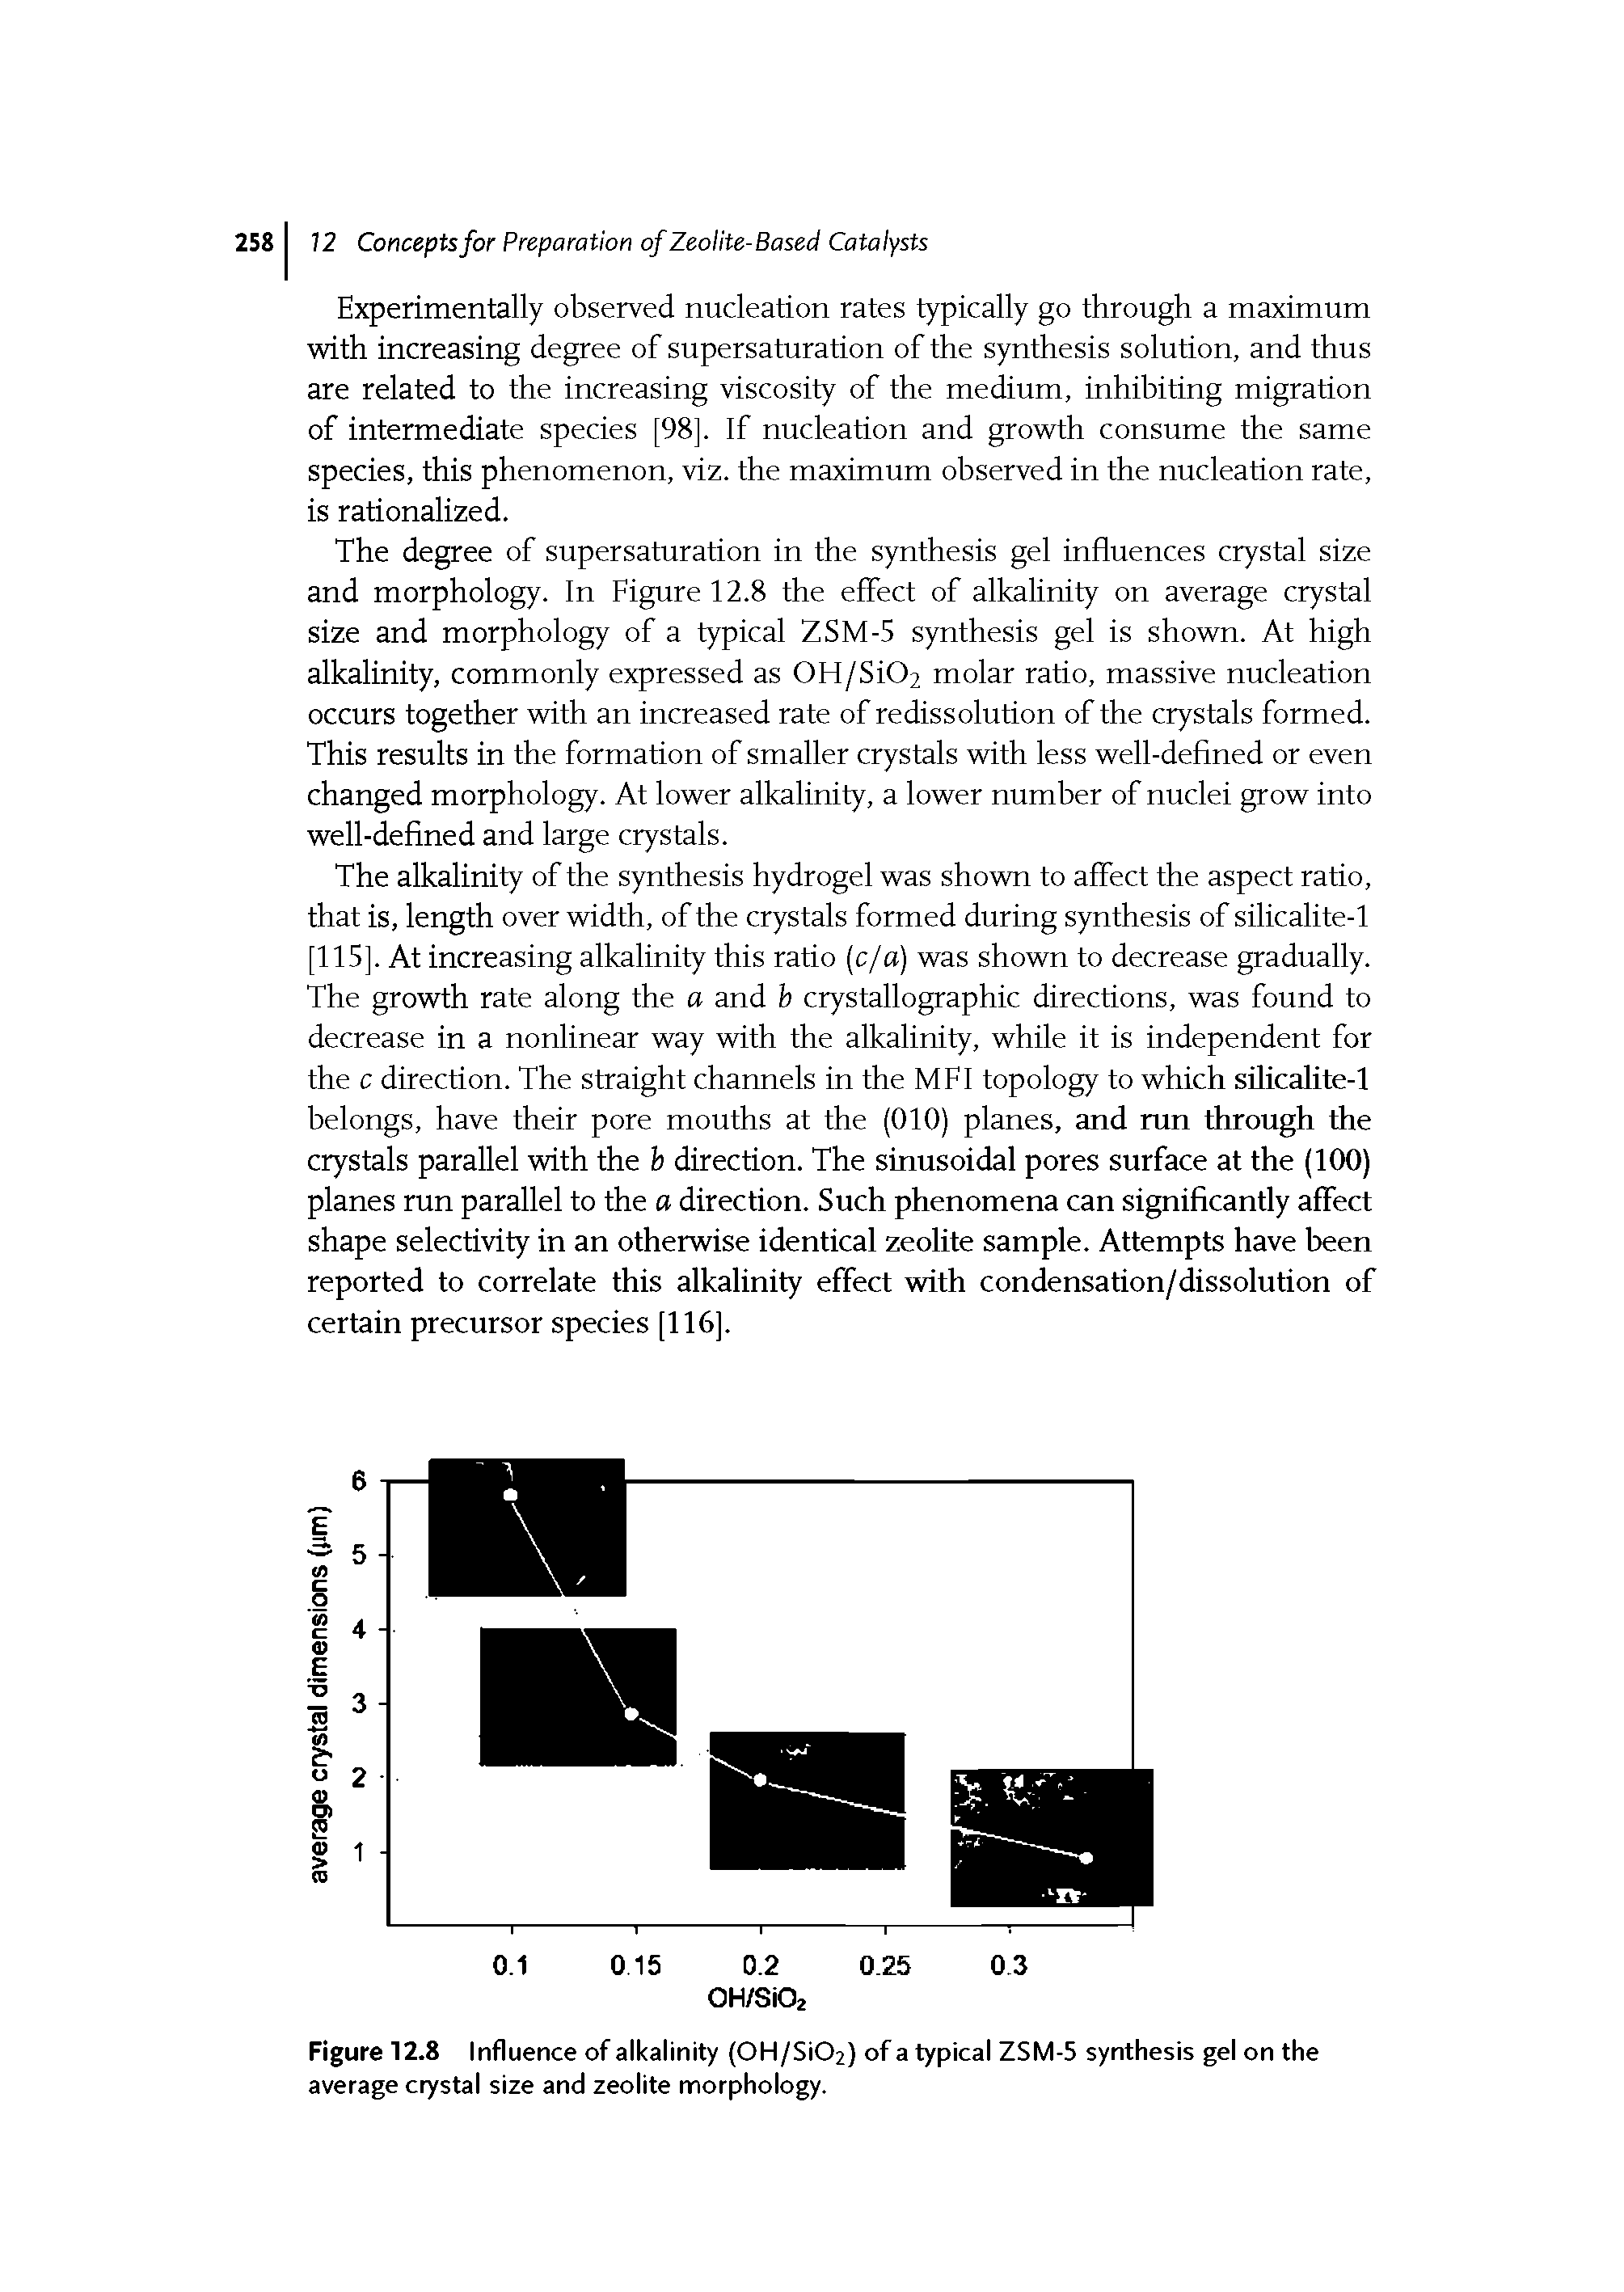 Figure 12.8 Influence of alkalinity (OH/Si02) of a typical ZSM-5 synthesis gel on the average crystal size and zeolite morphology.